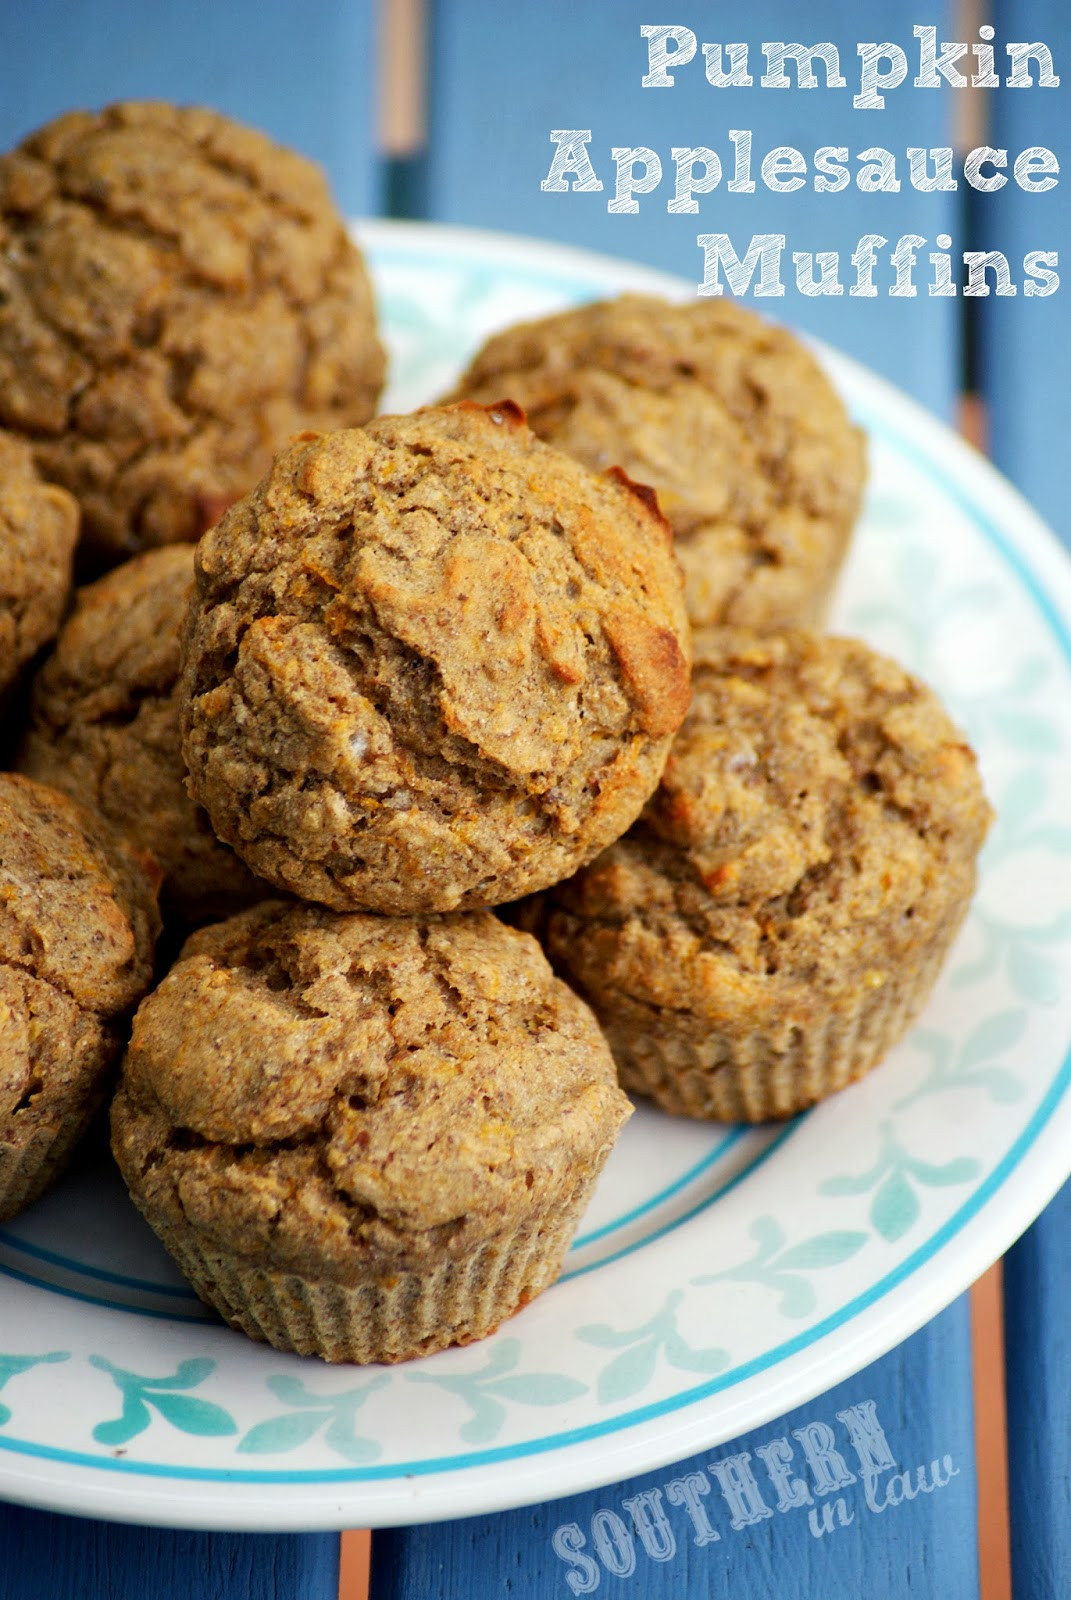 Applesauce Muffins Healthy
 Southern In Law Recipe Pumpkin Applesauce Muffins